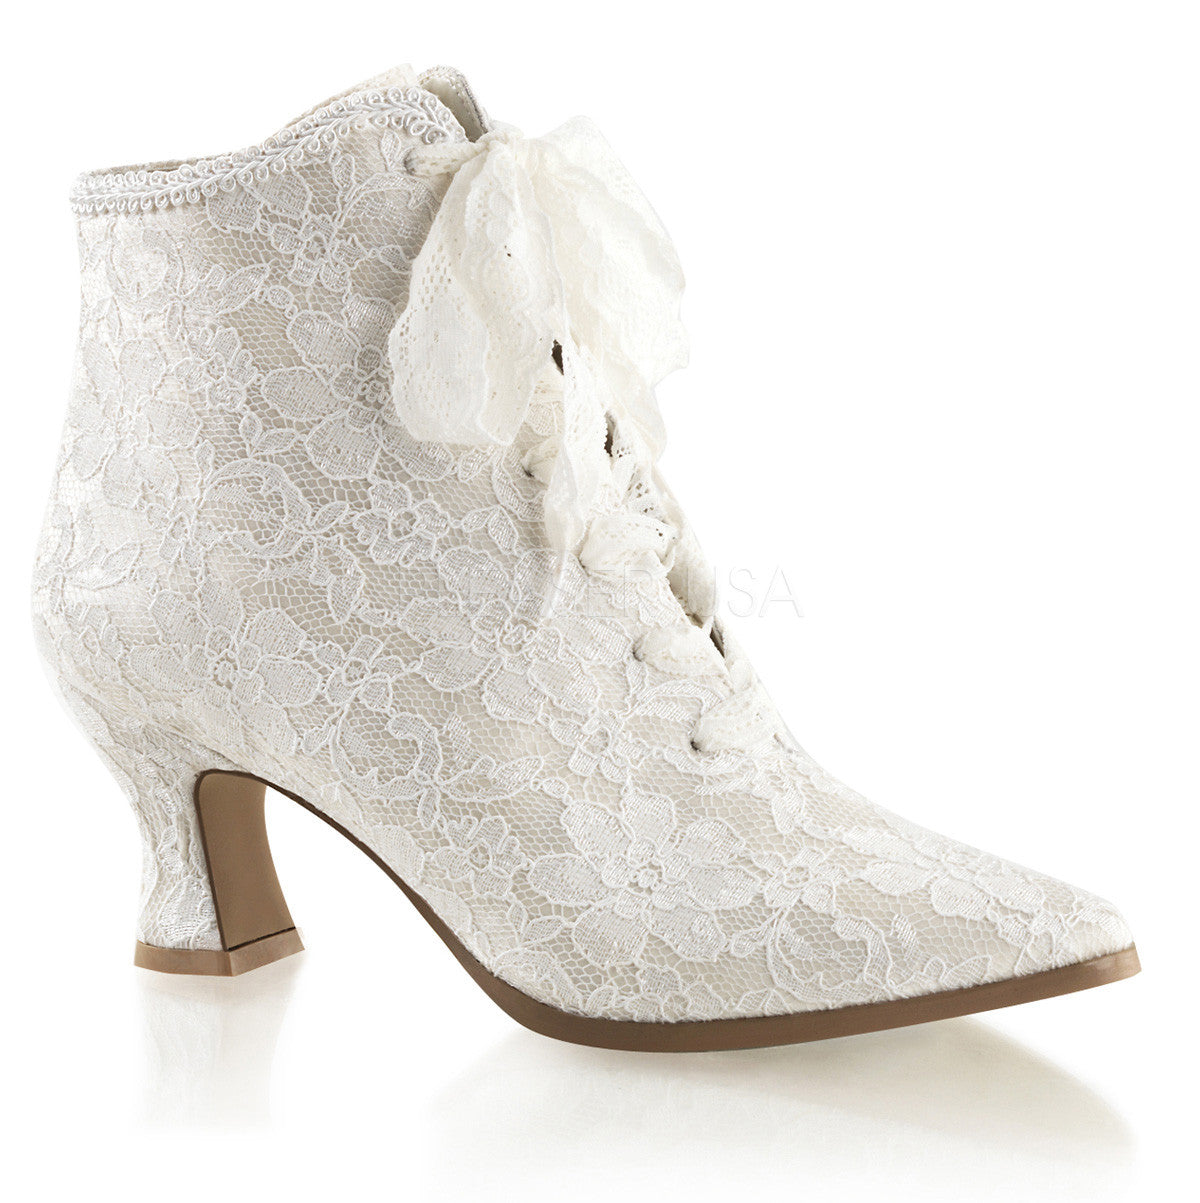 FABULICIOUS VICTORIAN-30 Ivory Satin-Lace Ankle Boots - Shoecup.com